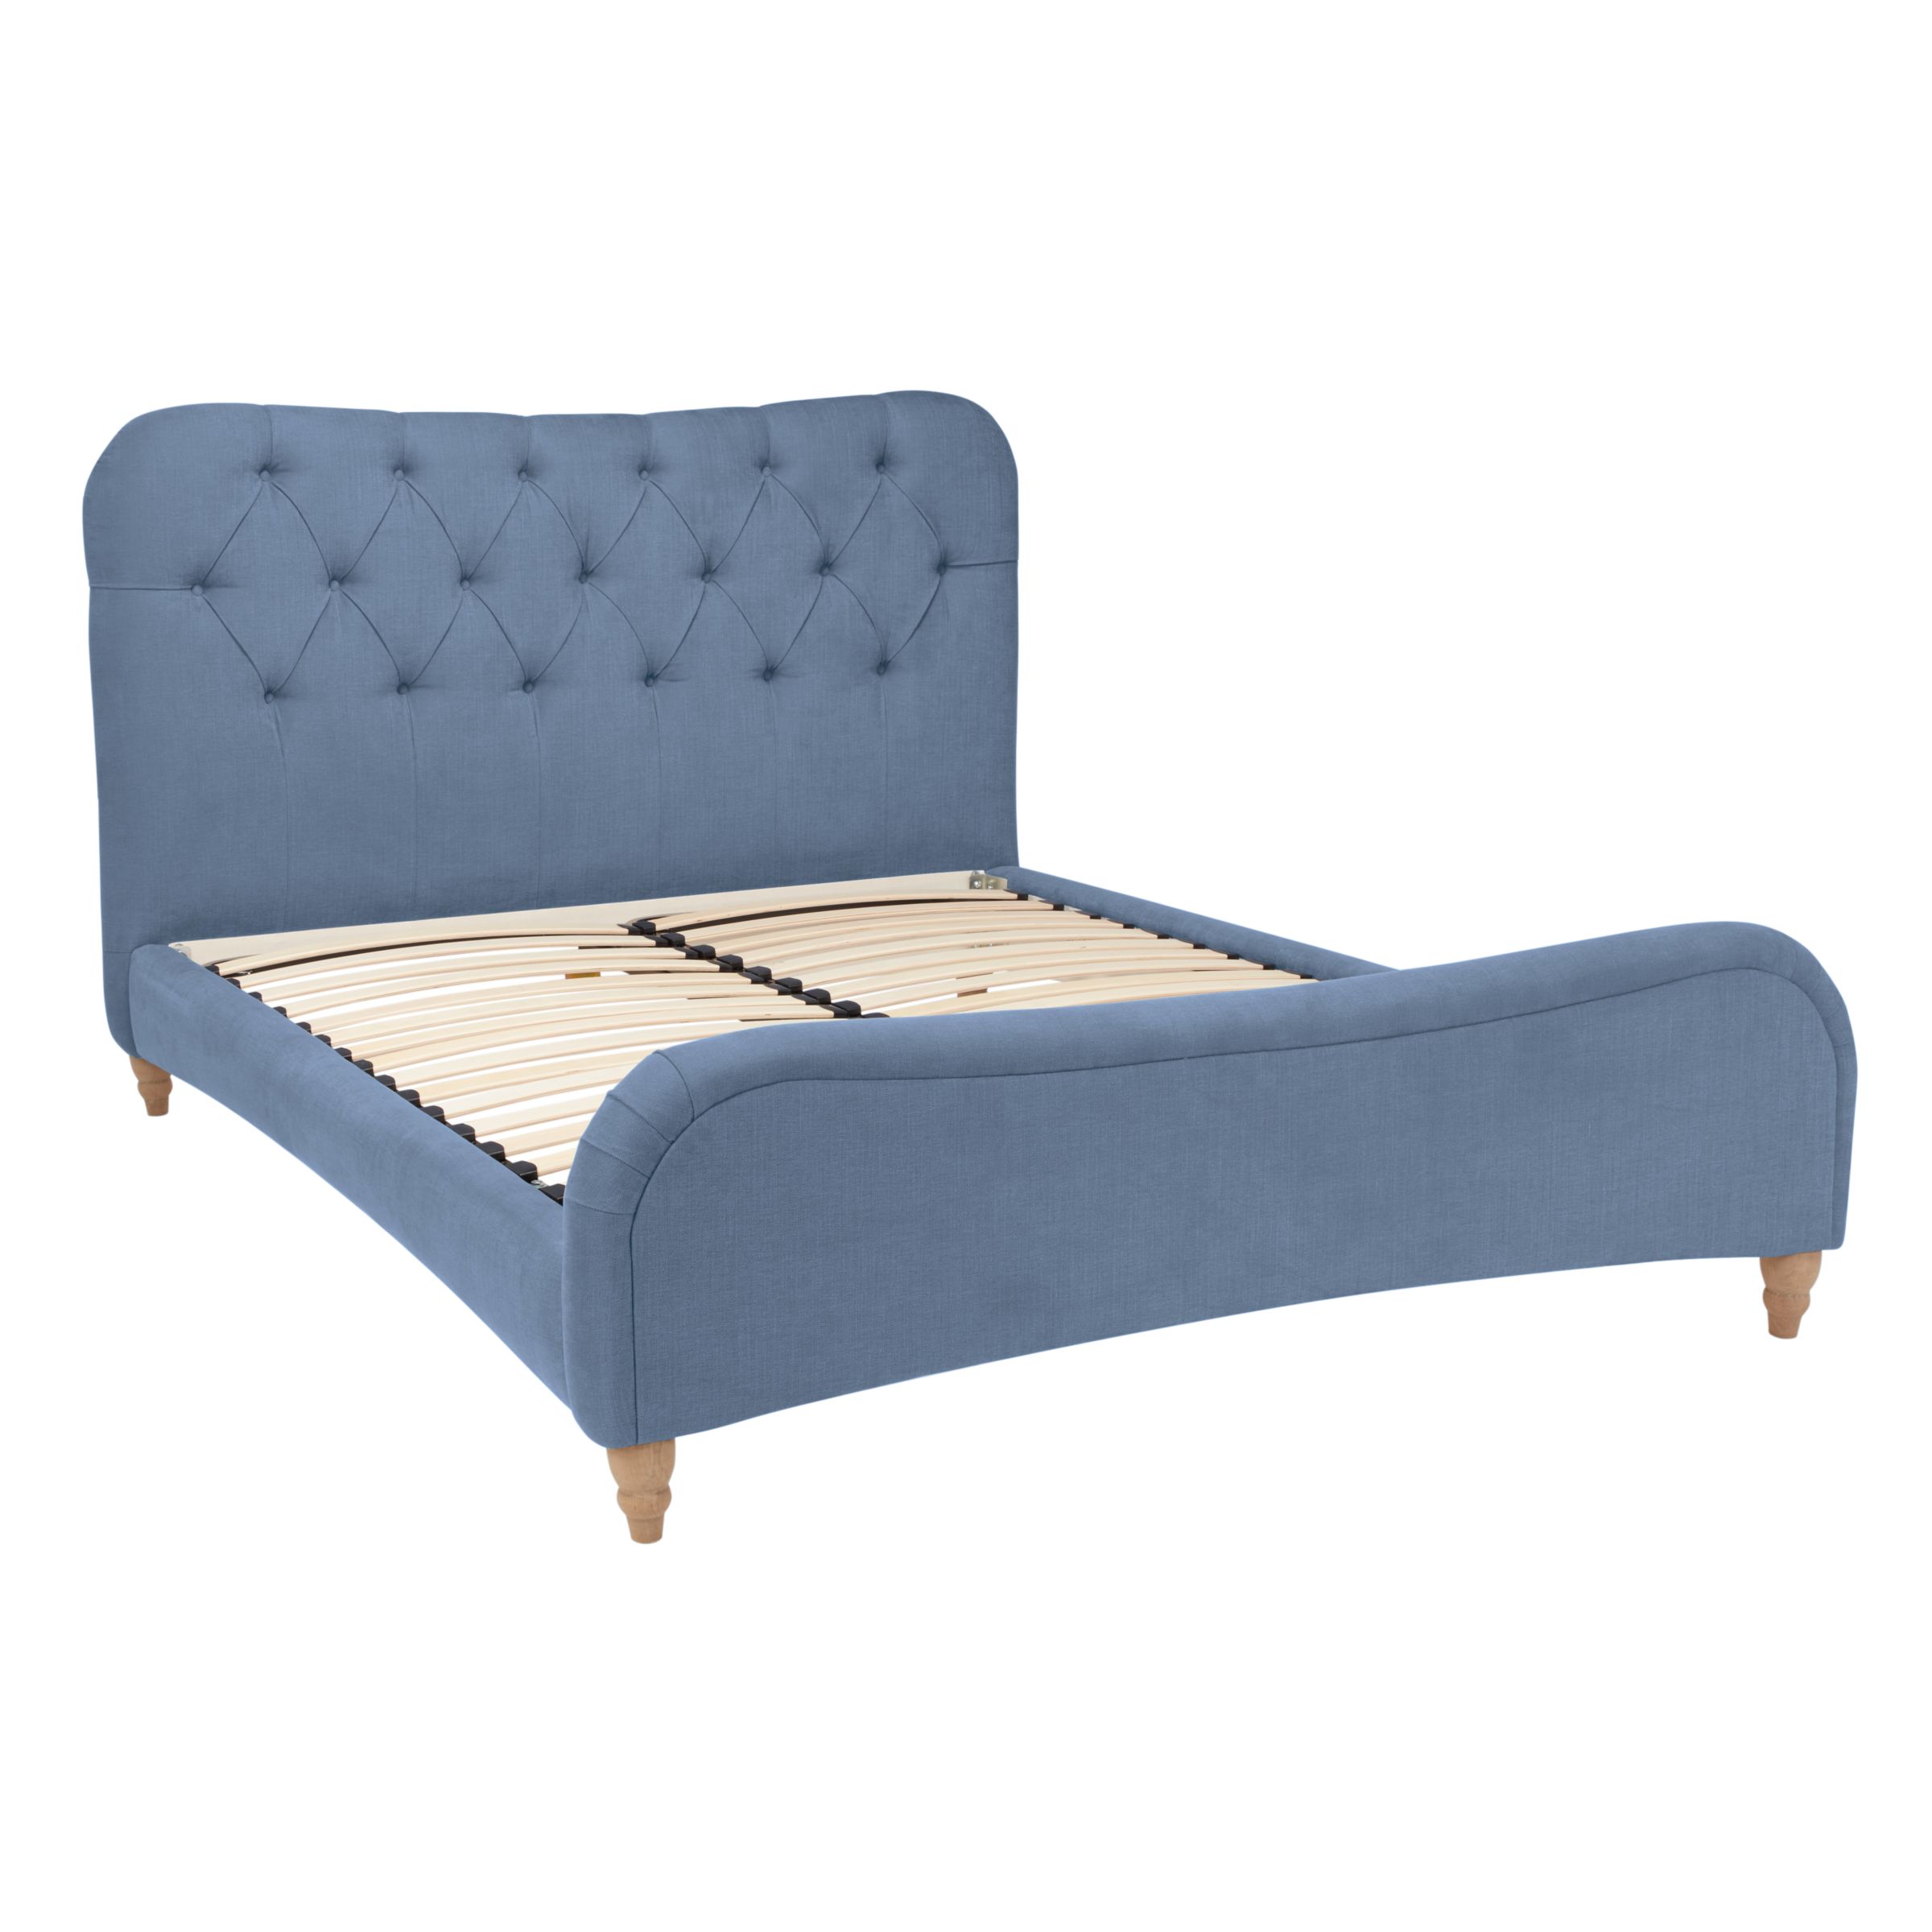 Brioche Bed Frame by Loaf at John Lewis in Brushed Cotton, Double